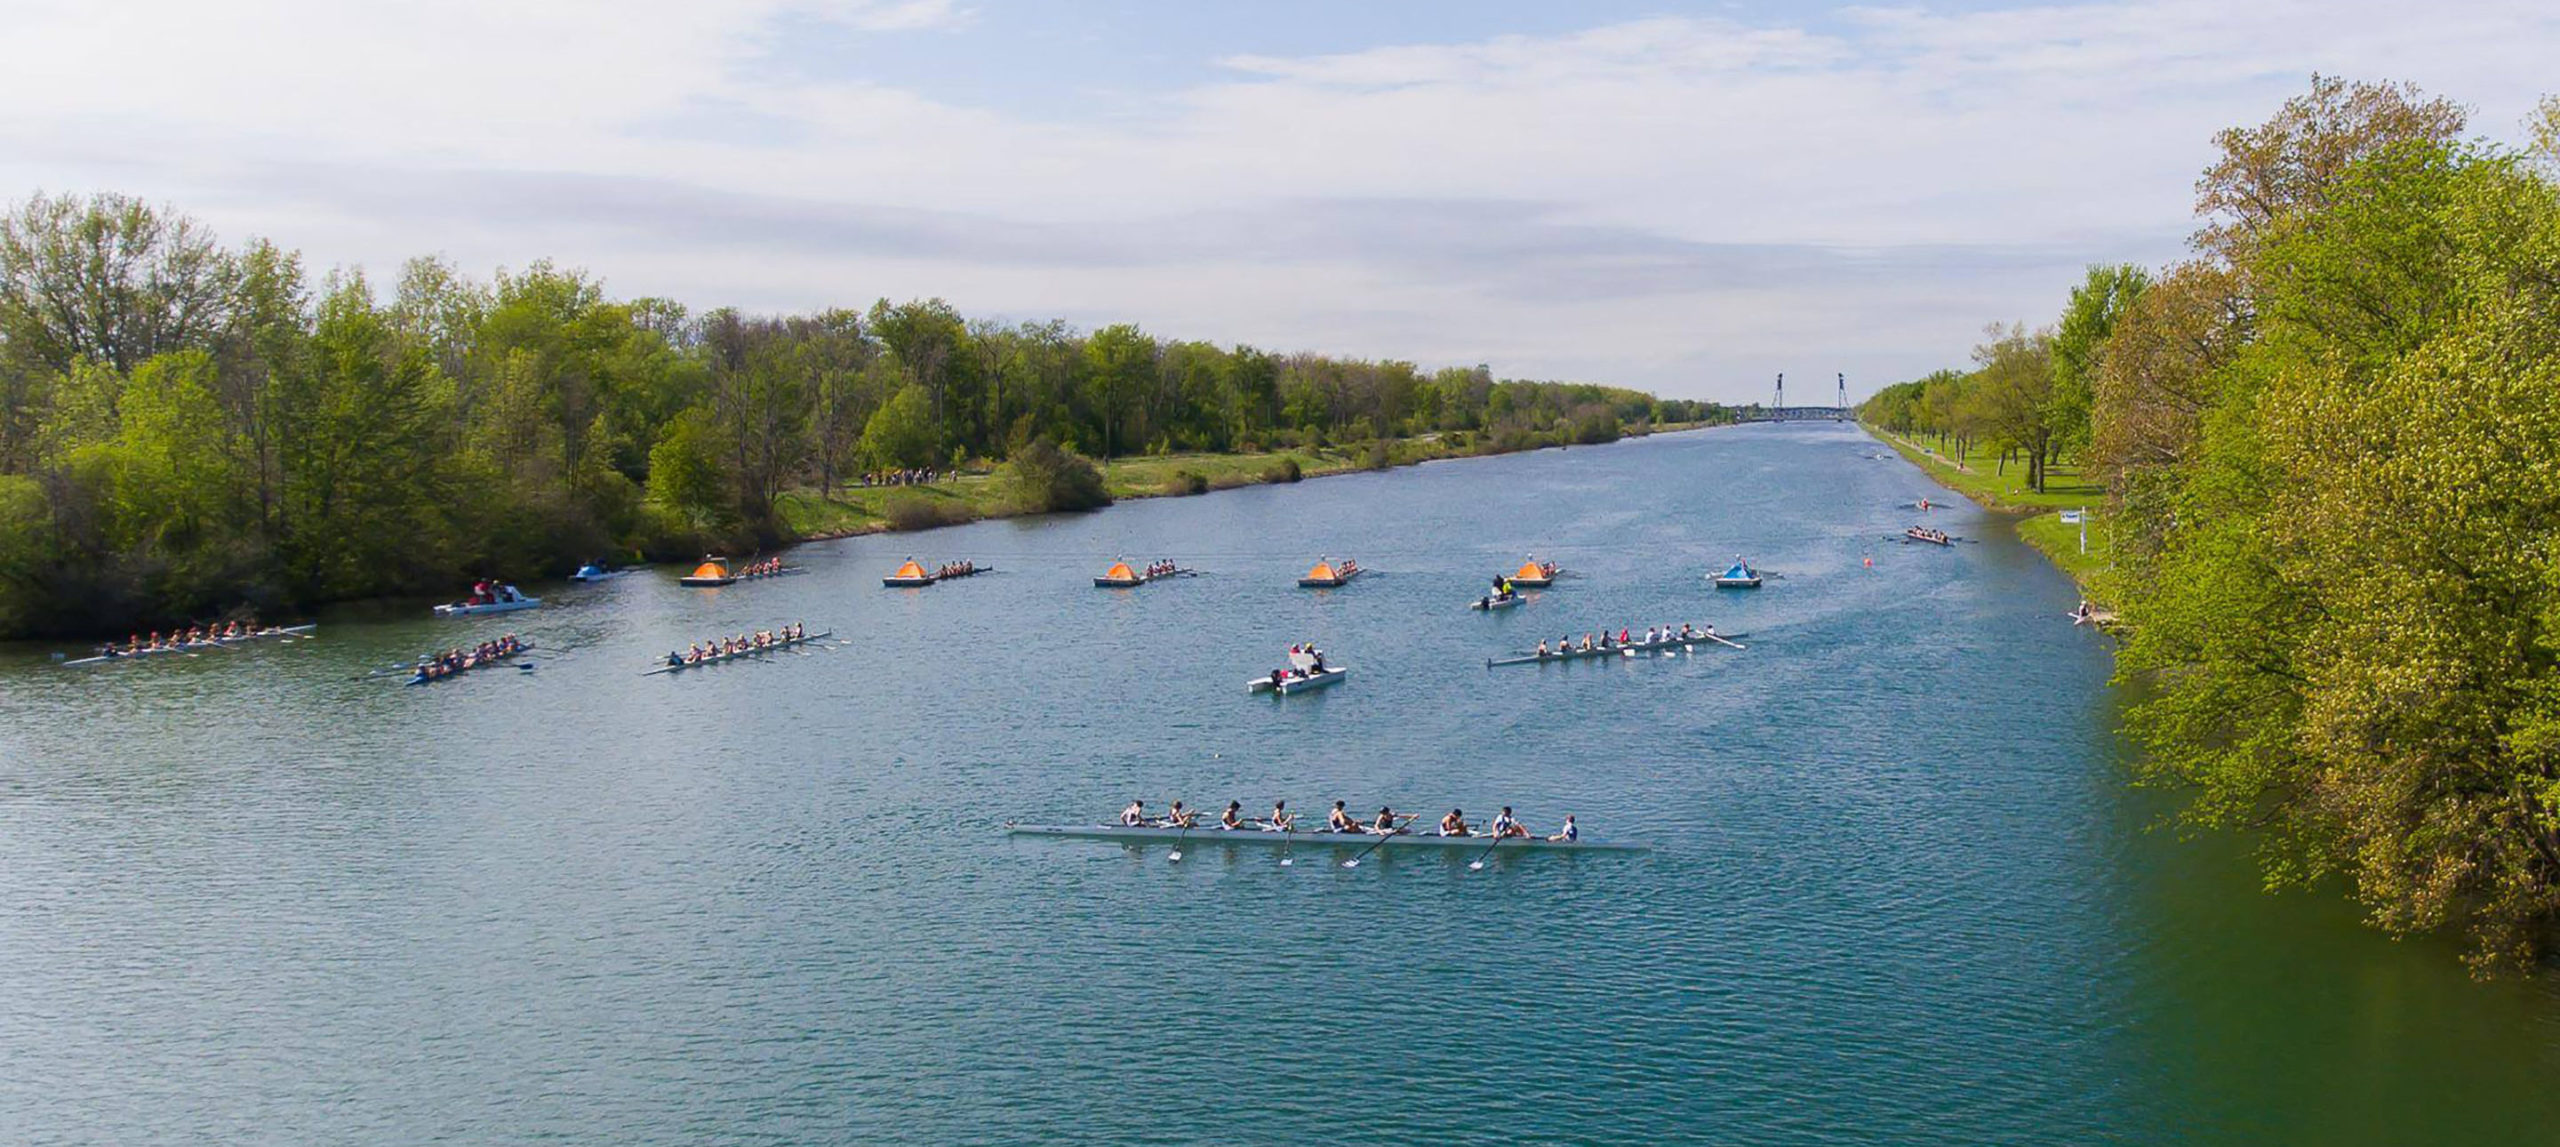 Welland to Host 2020 National Rowing Championships